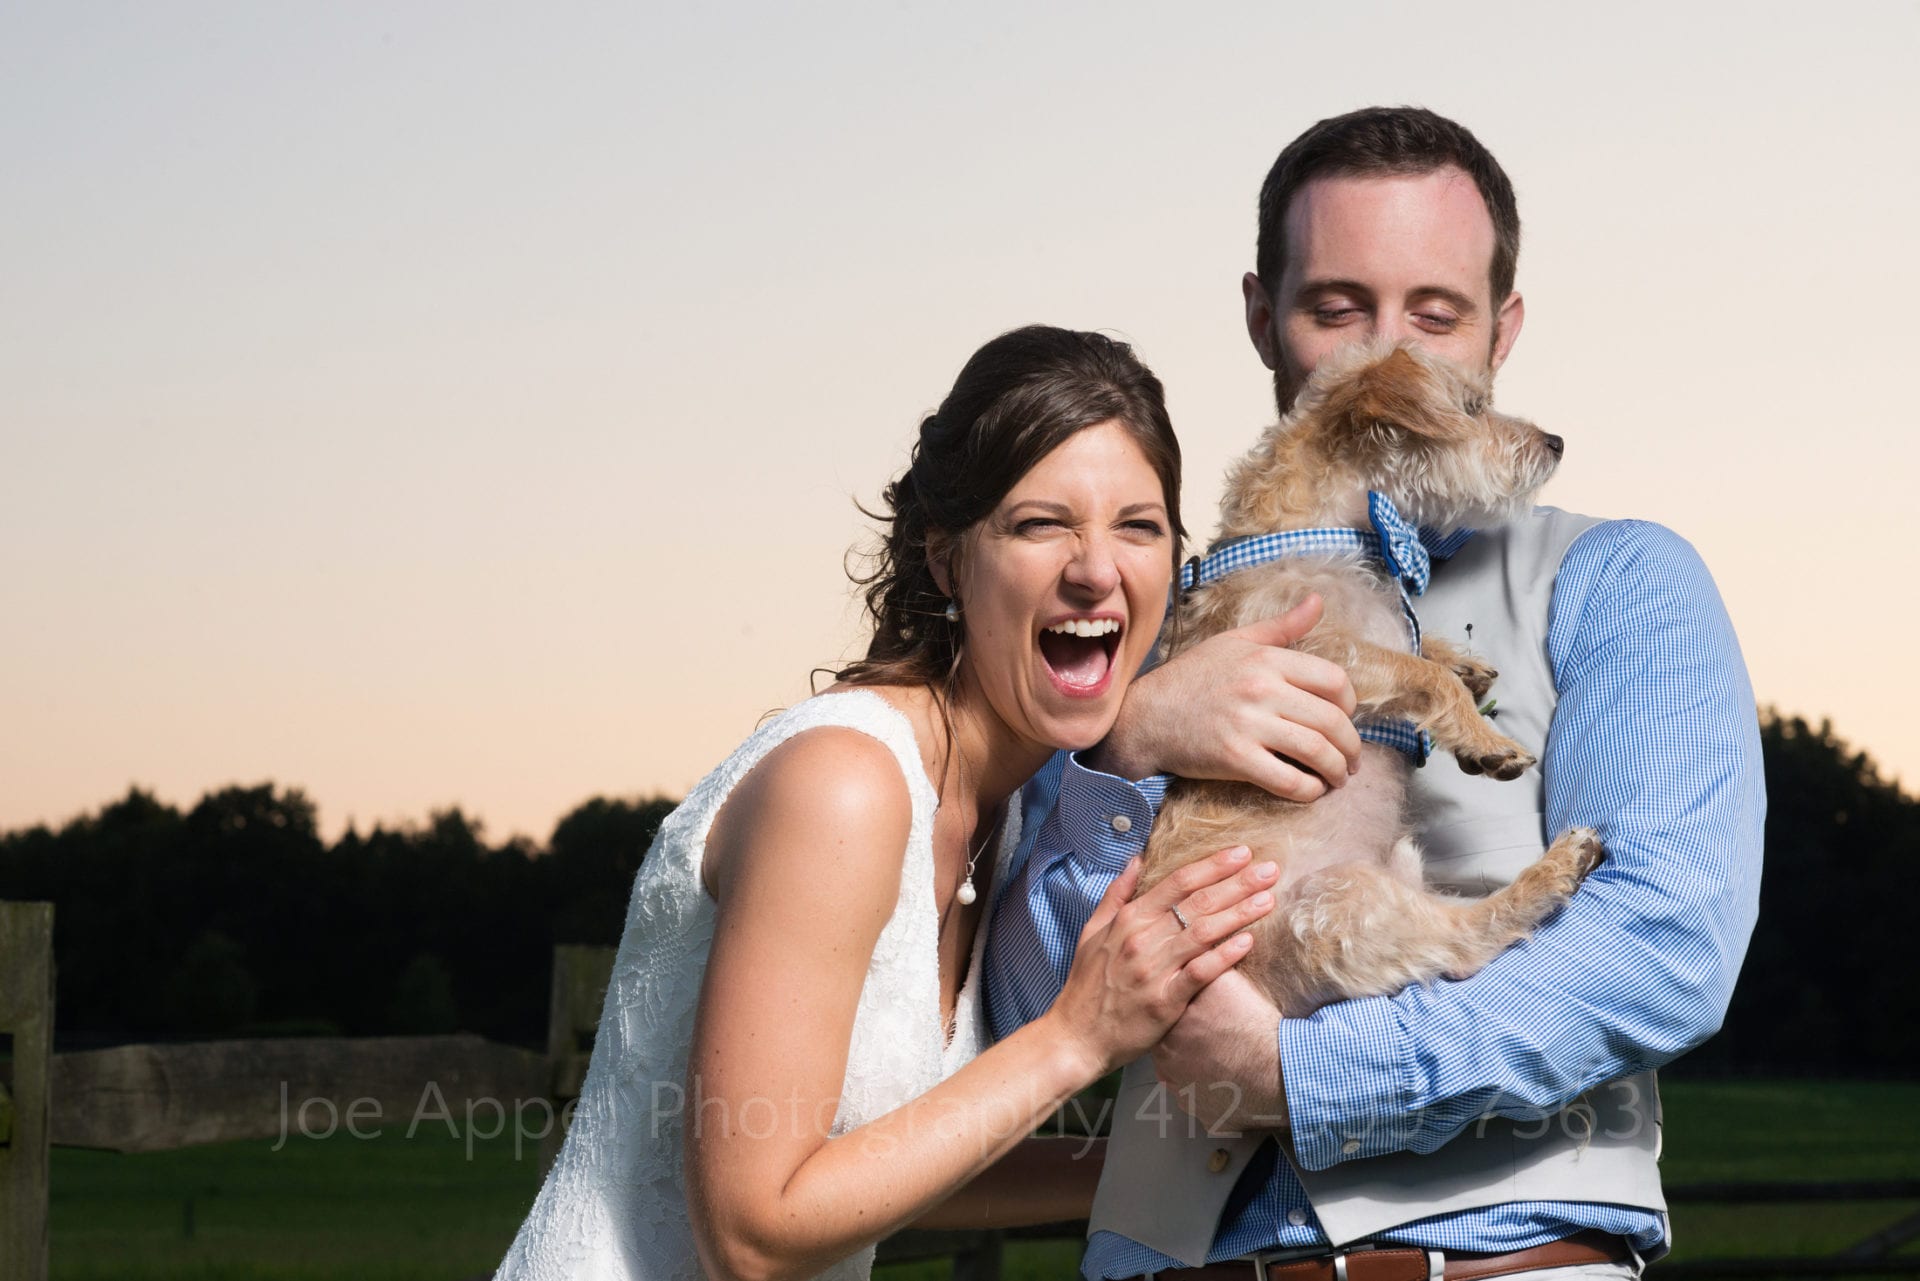 A bride laughs as she and her groom hold their terrier in a family photo.